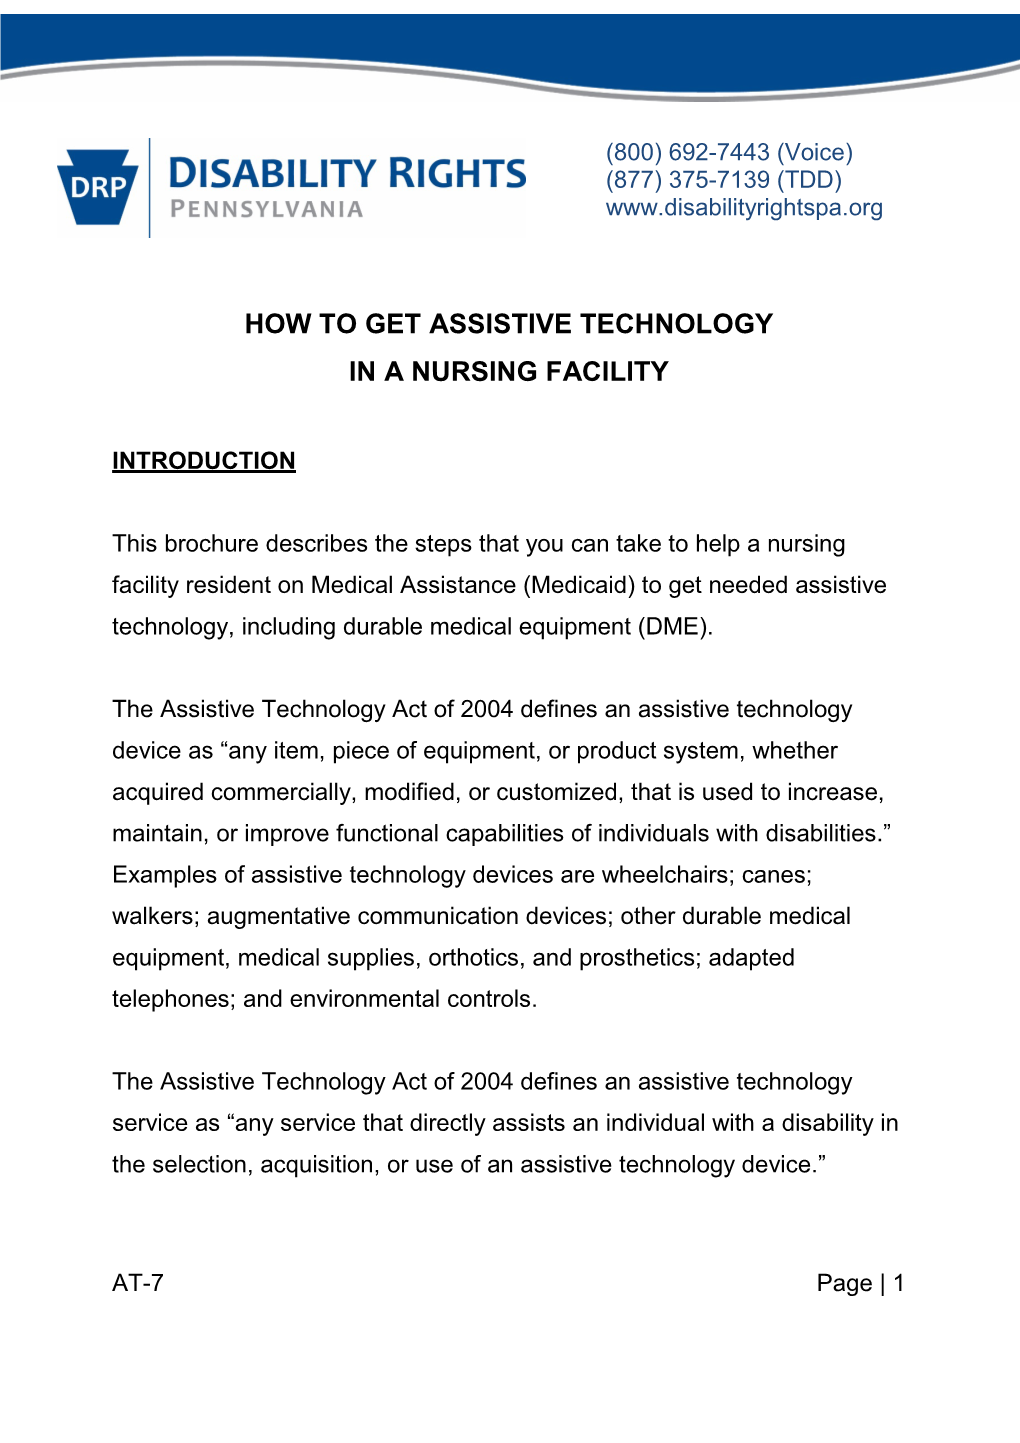 How to Get Assistive Technology in Nursing Facilities AT-7